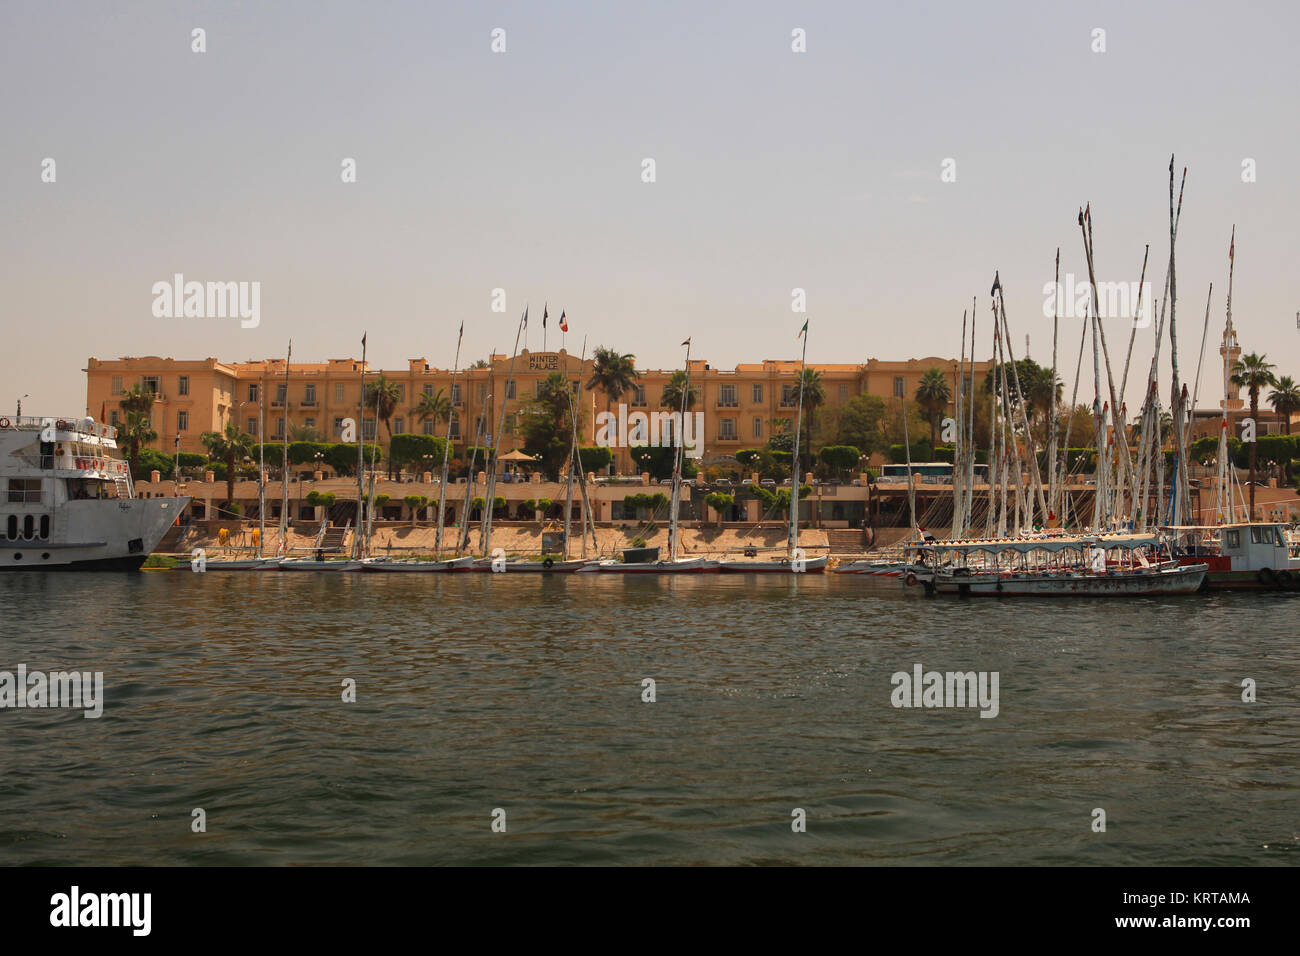 LUXOR, EGYPT - MARCH 29,2017: Sofitel Winter Palace, a 5-star hotel built by British explorers on the River Nile, surrounded by ancient temples. Agath Stock Photo